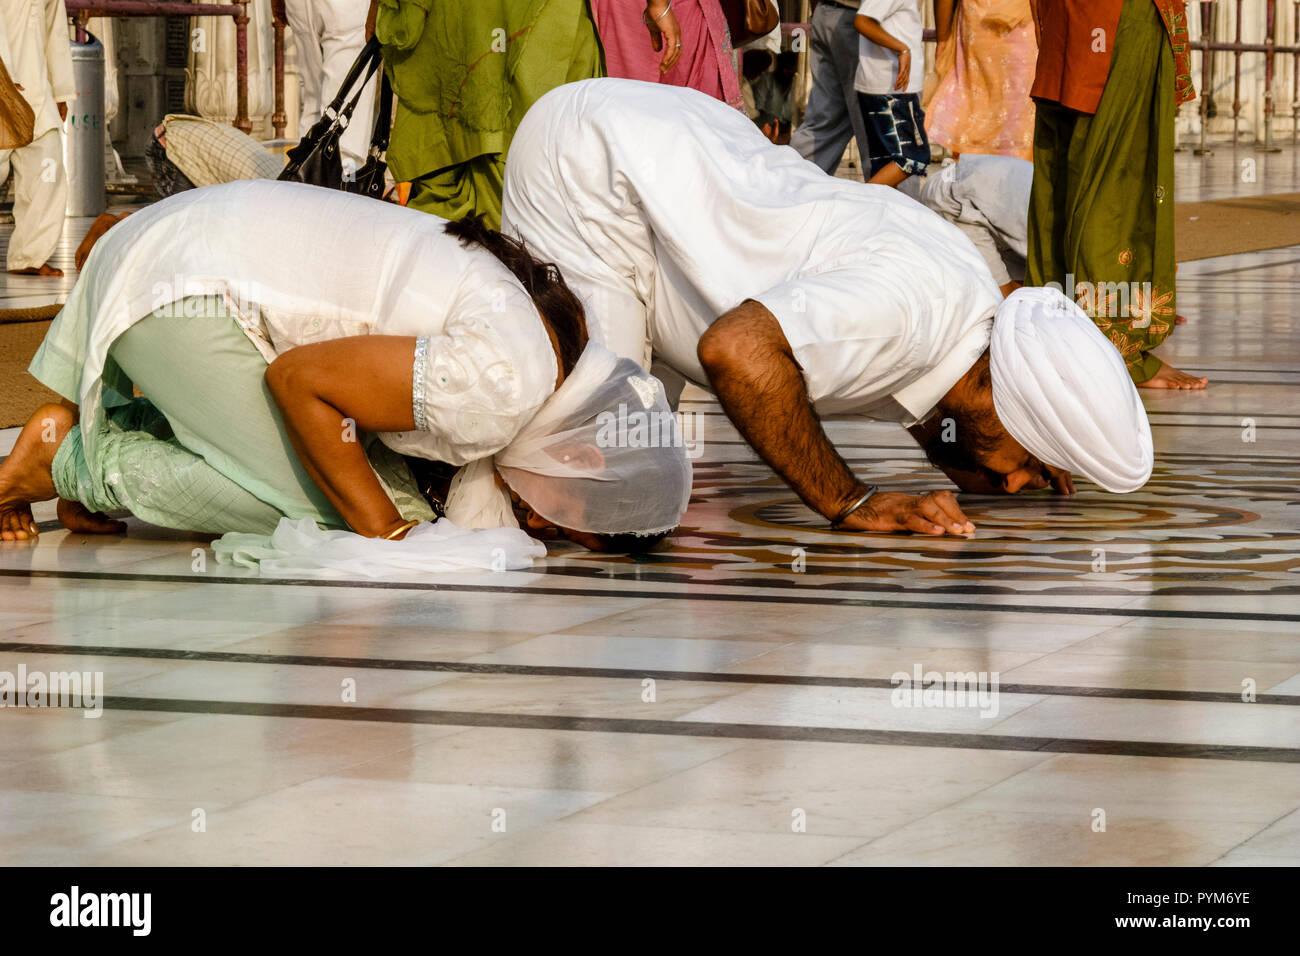 Sikh devotees praying at the entrance into the Golden Temple Complex Stock Photo